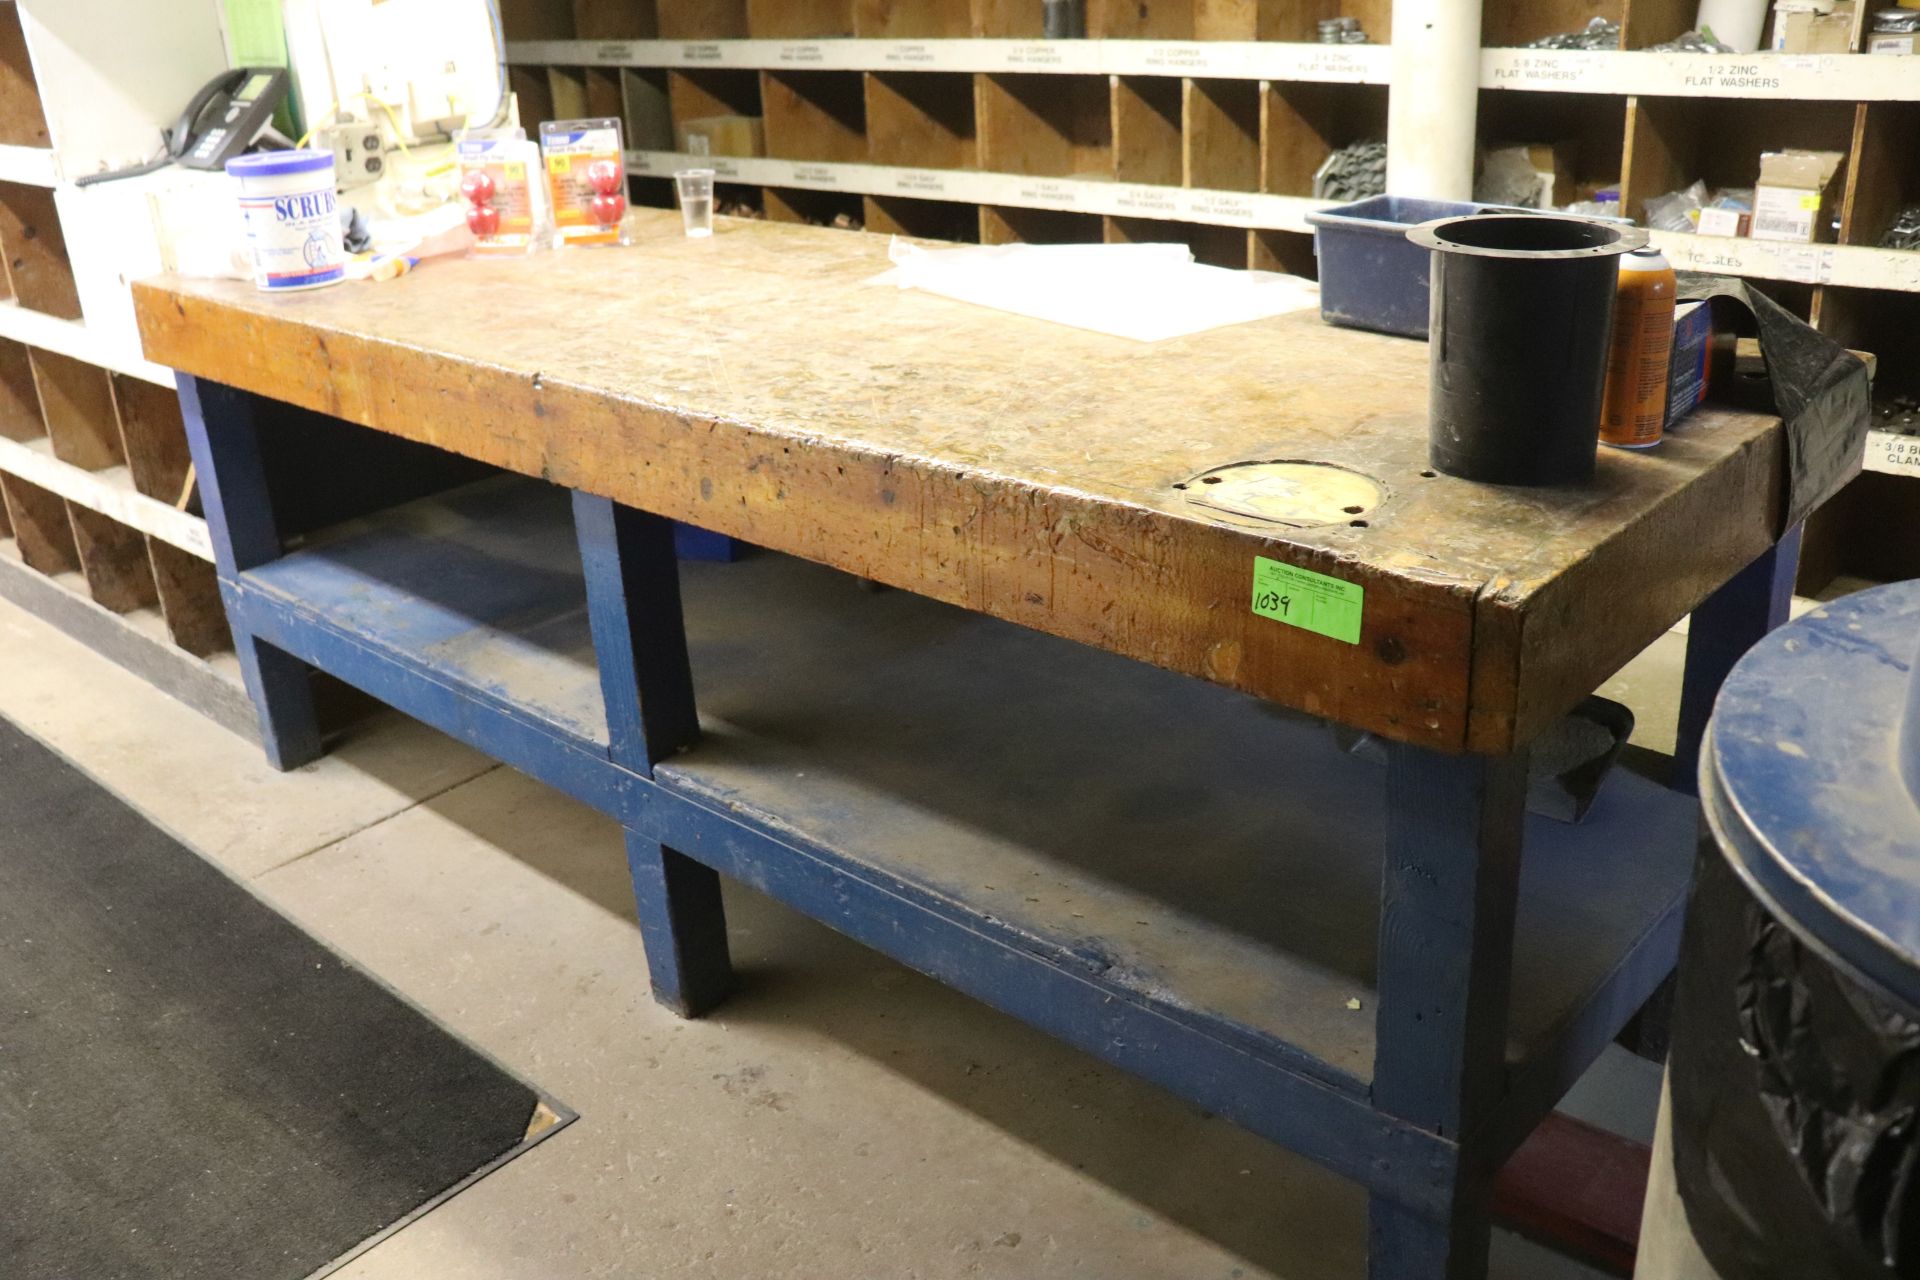 Wooden work table, approximately 8' long, 2-1/2' wide